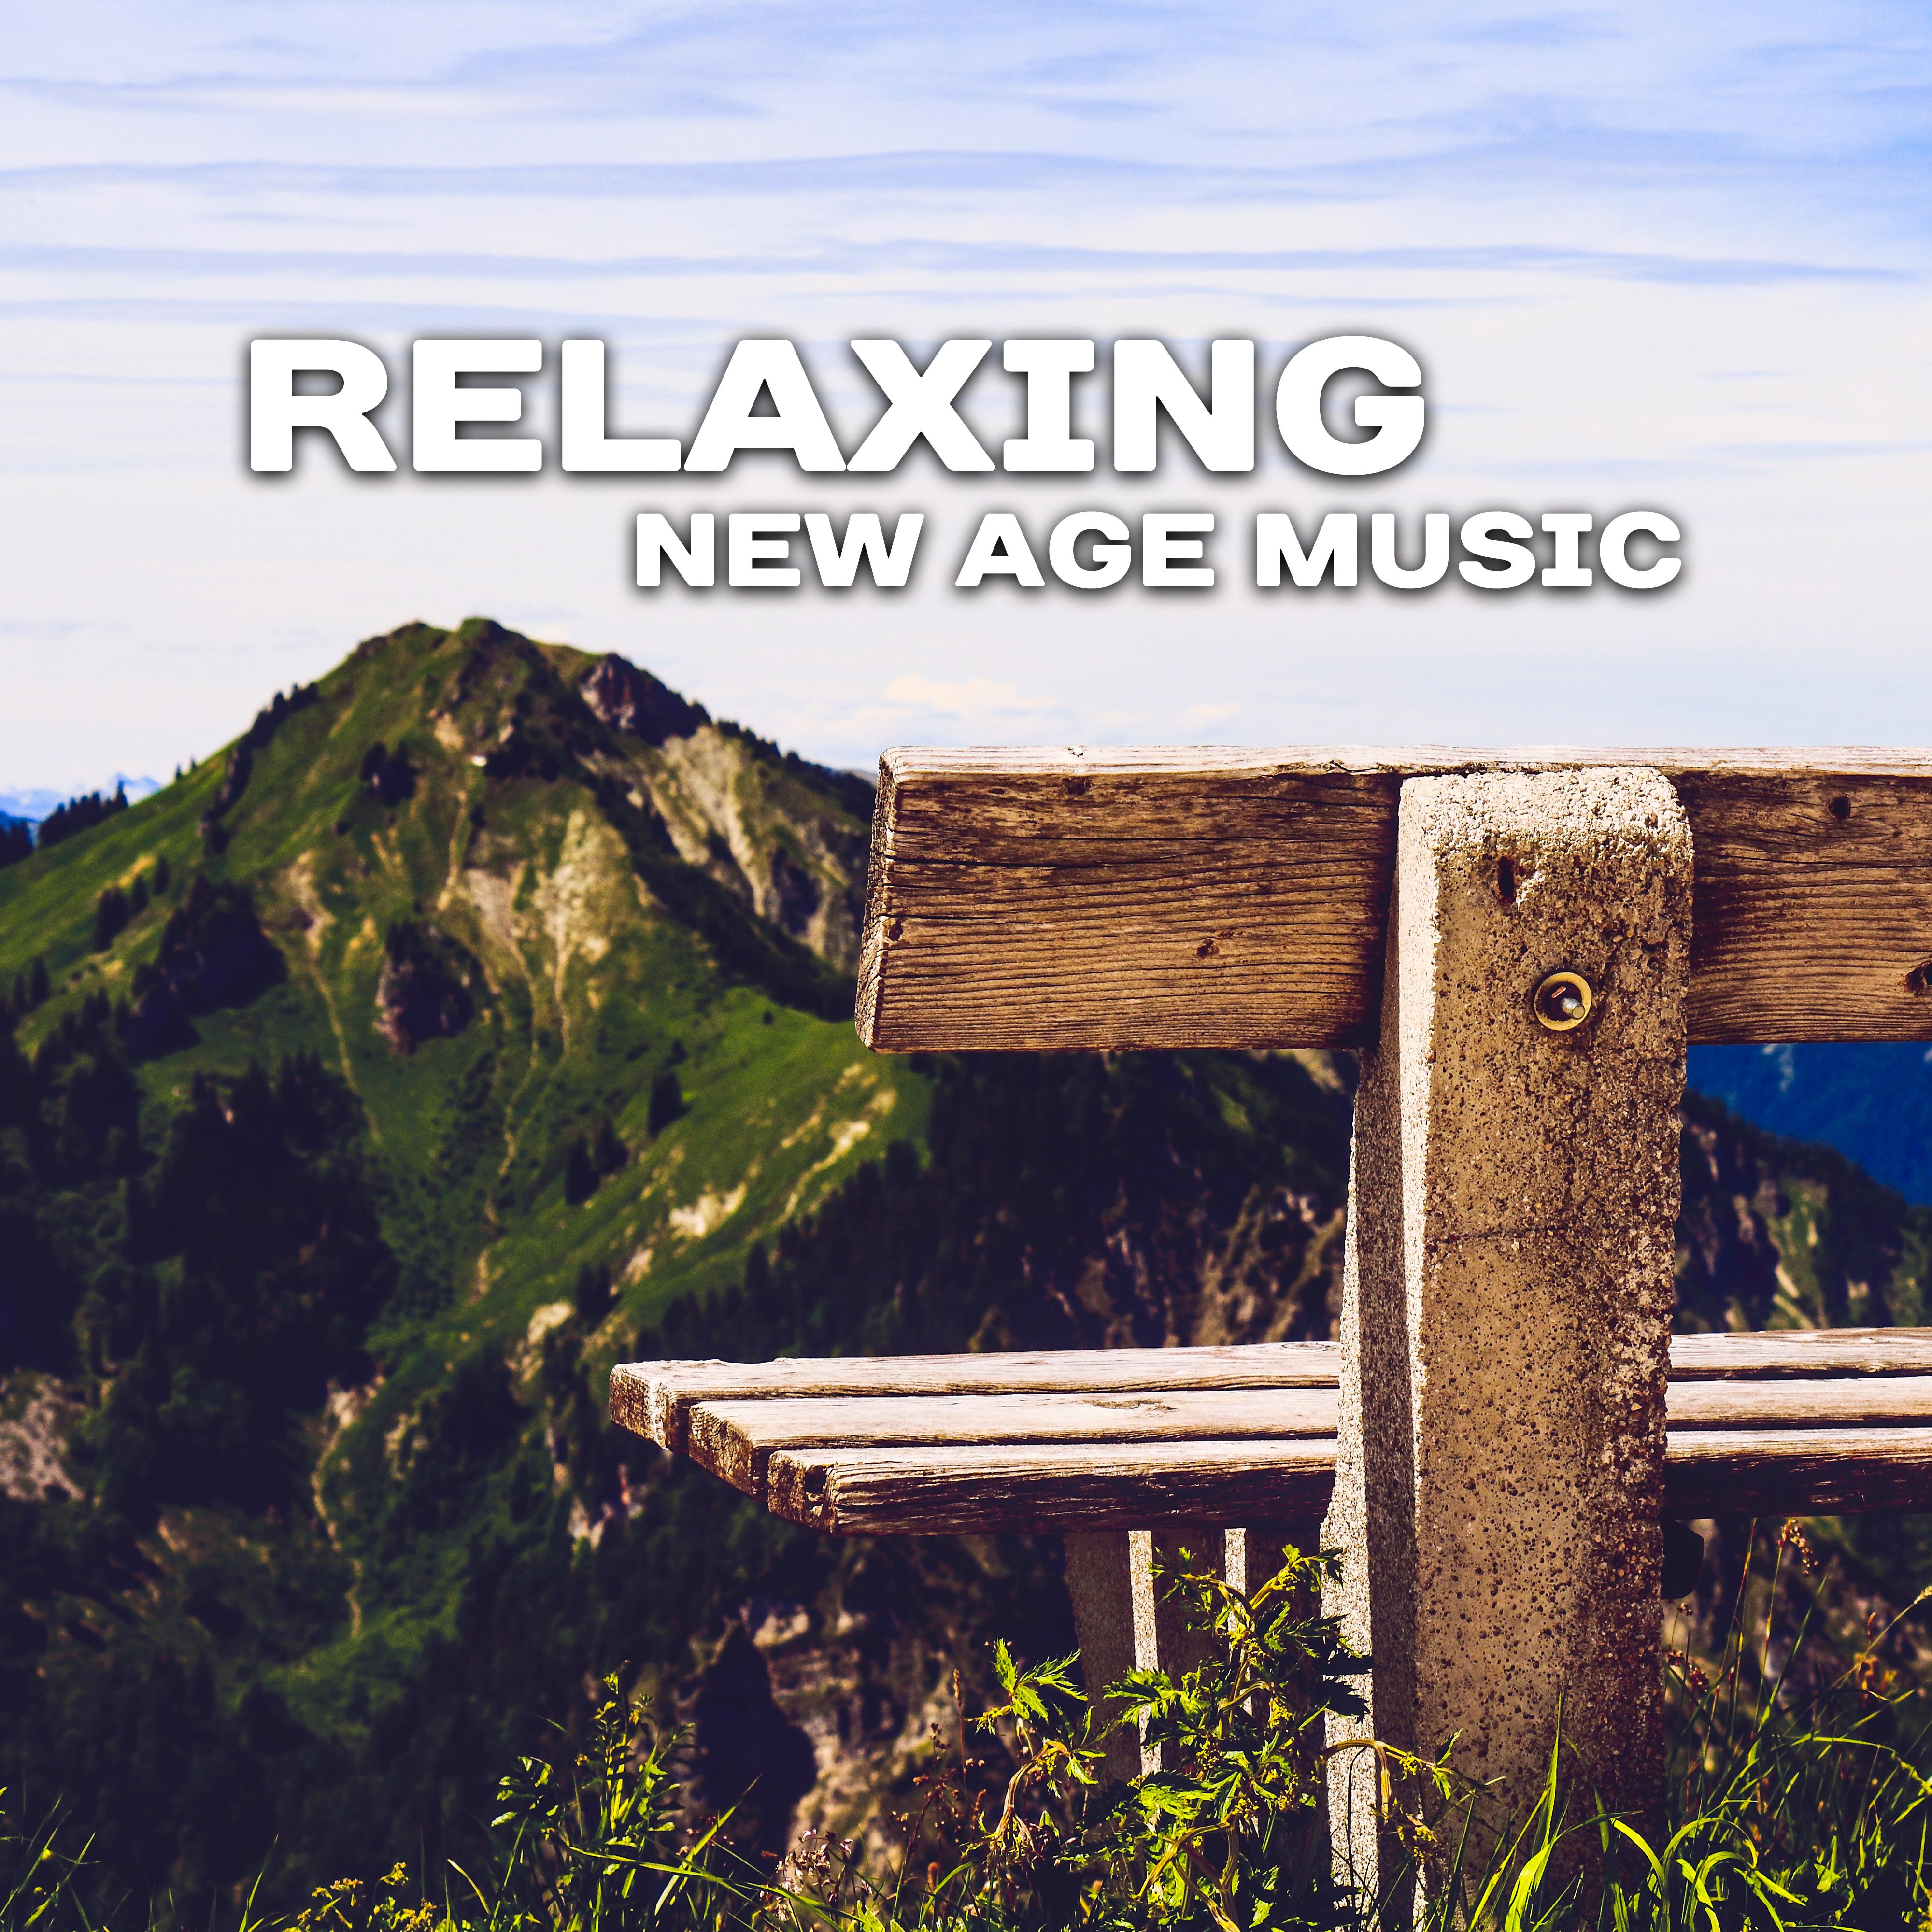 Relaxing New Age Music  Stress Relief, Time to Rest, Calming Sounds, Chill Day with New Age